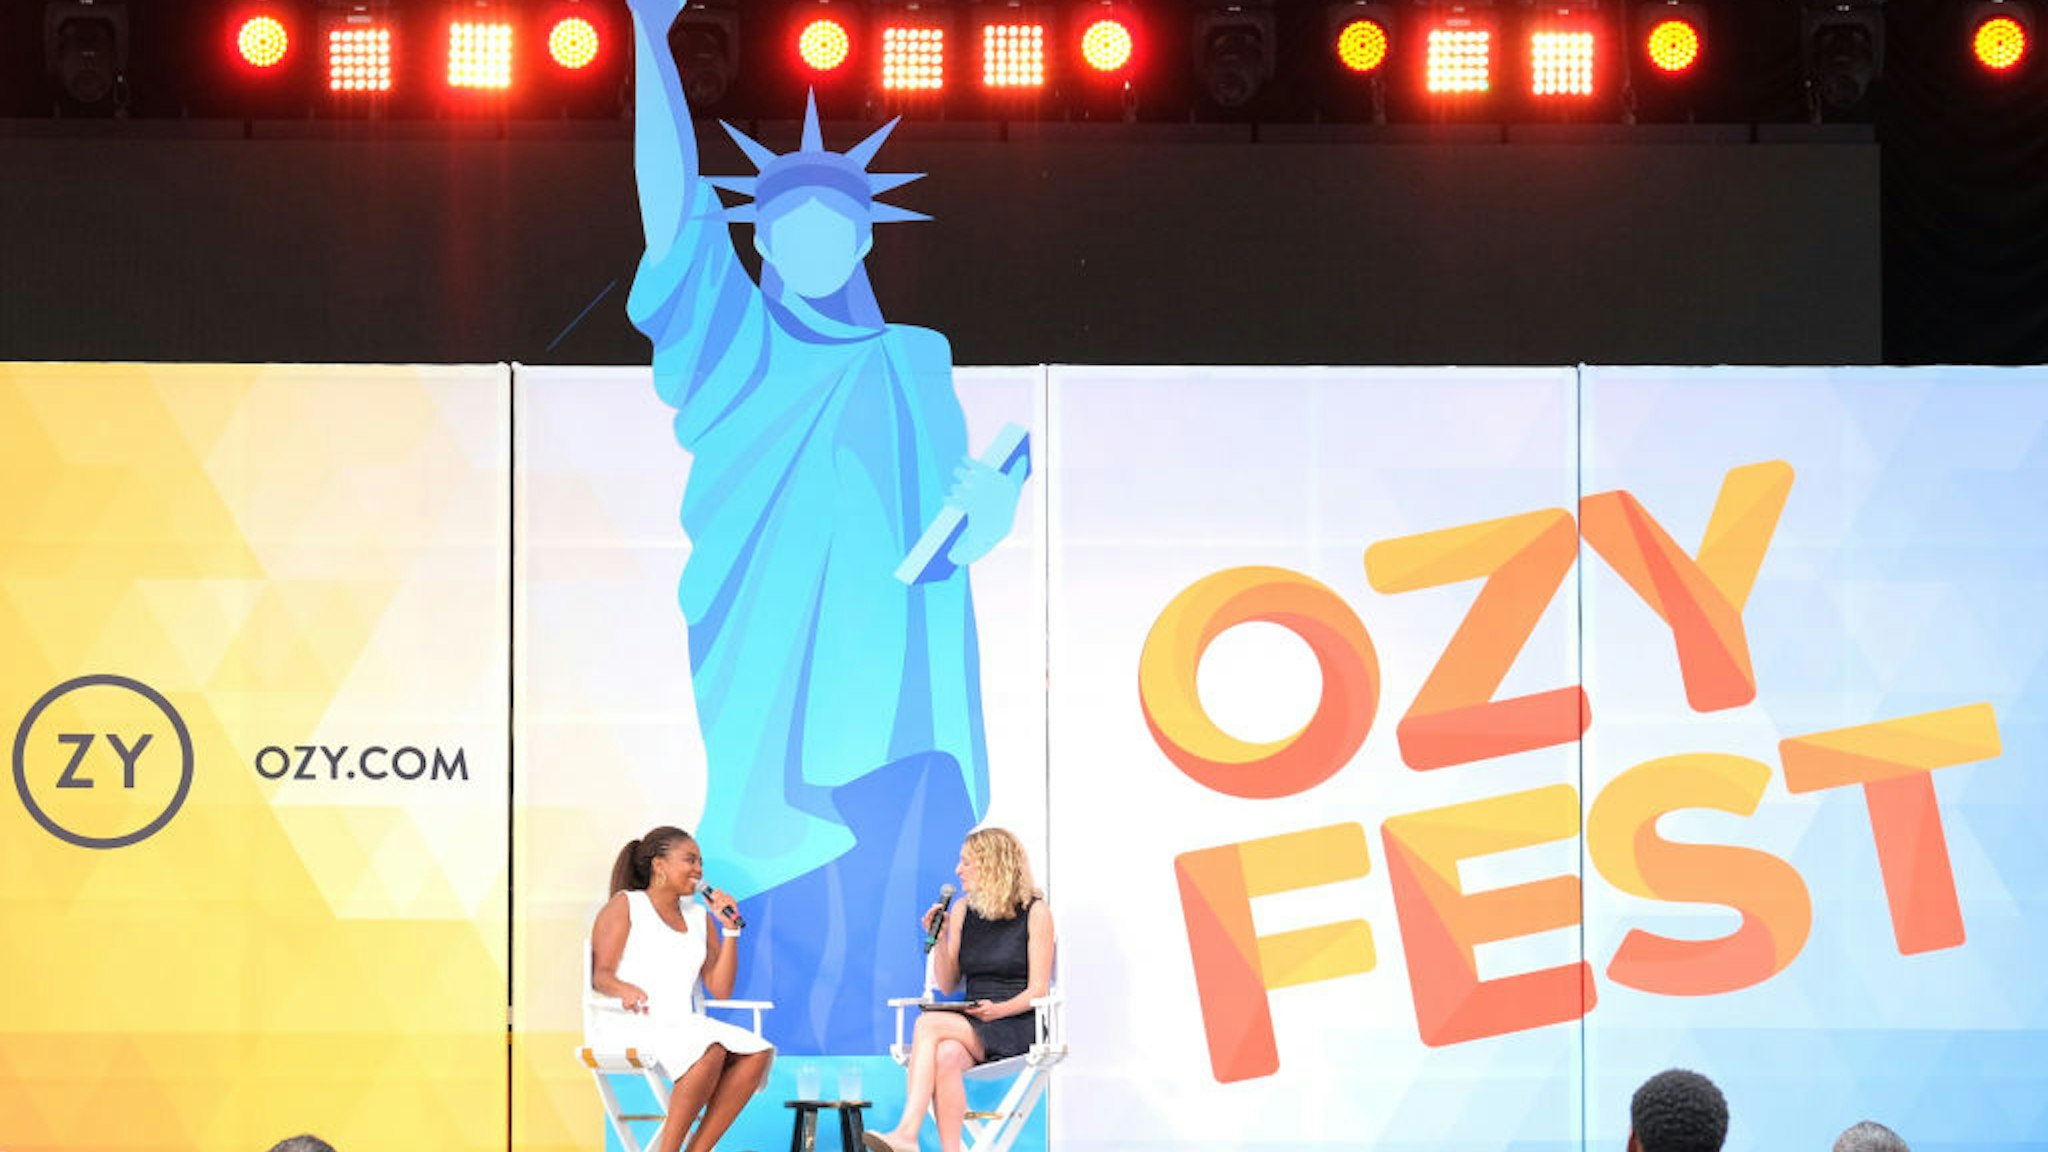 Jemele Hill (L) and Fay Schlesinger speak onstage during OZY Fest 2018 at Rumsey Playfield, Central Park on July 22, 2018 in New York City.